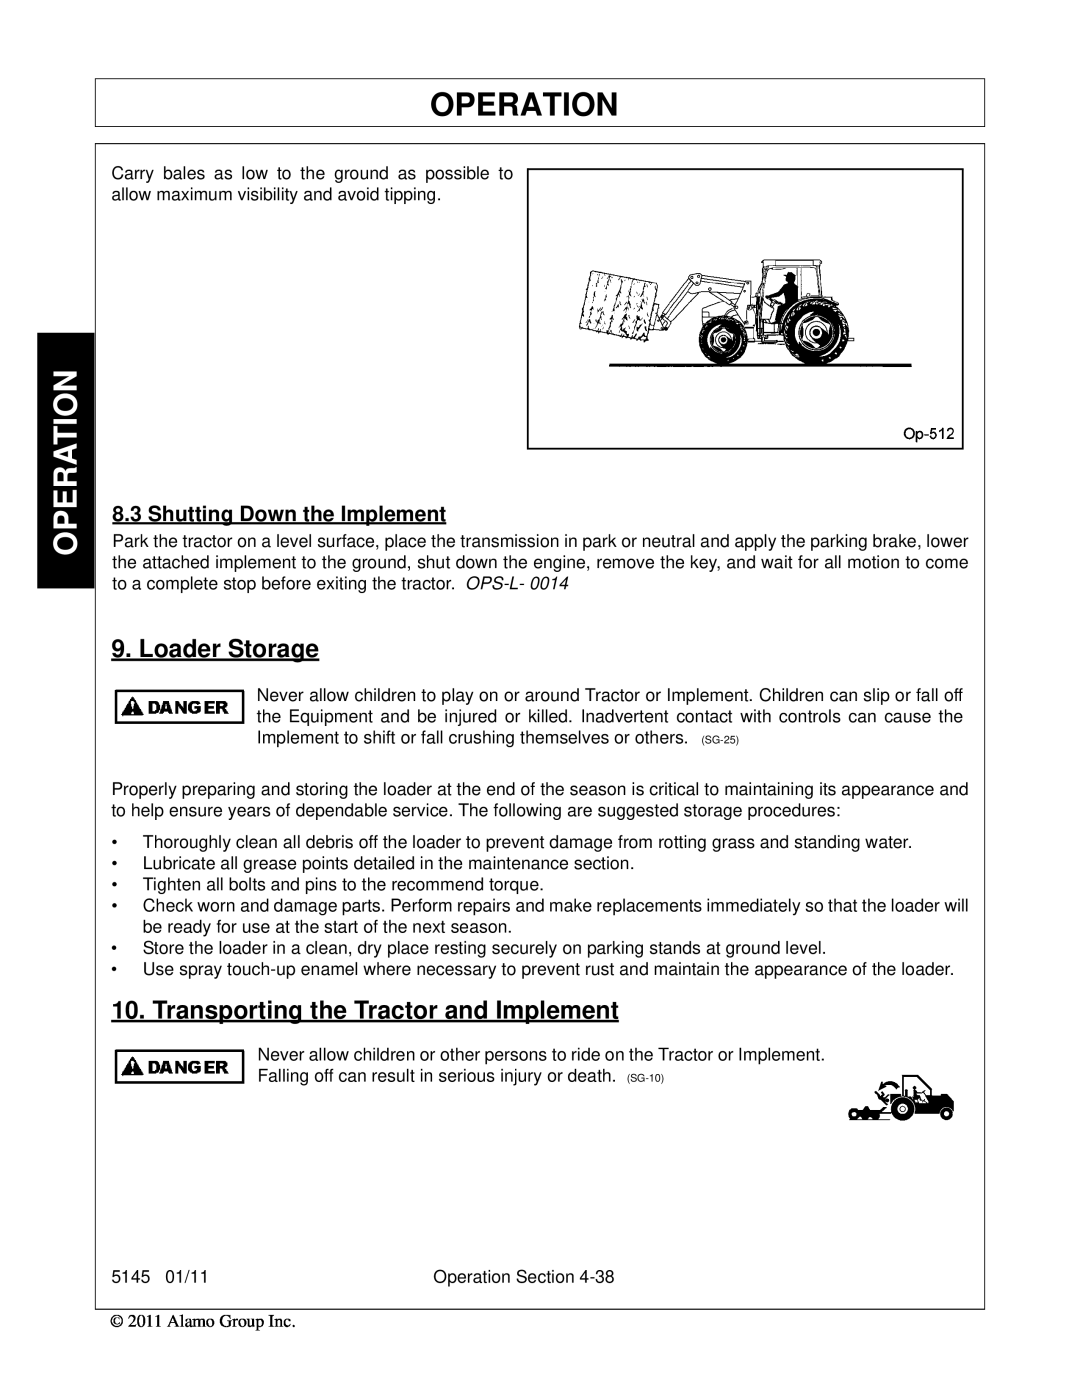 Bush Hog 5145 manual Operation, Loader Storage, Transporting the Tractor and Implement, Shutting Down the Implement 